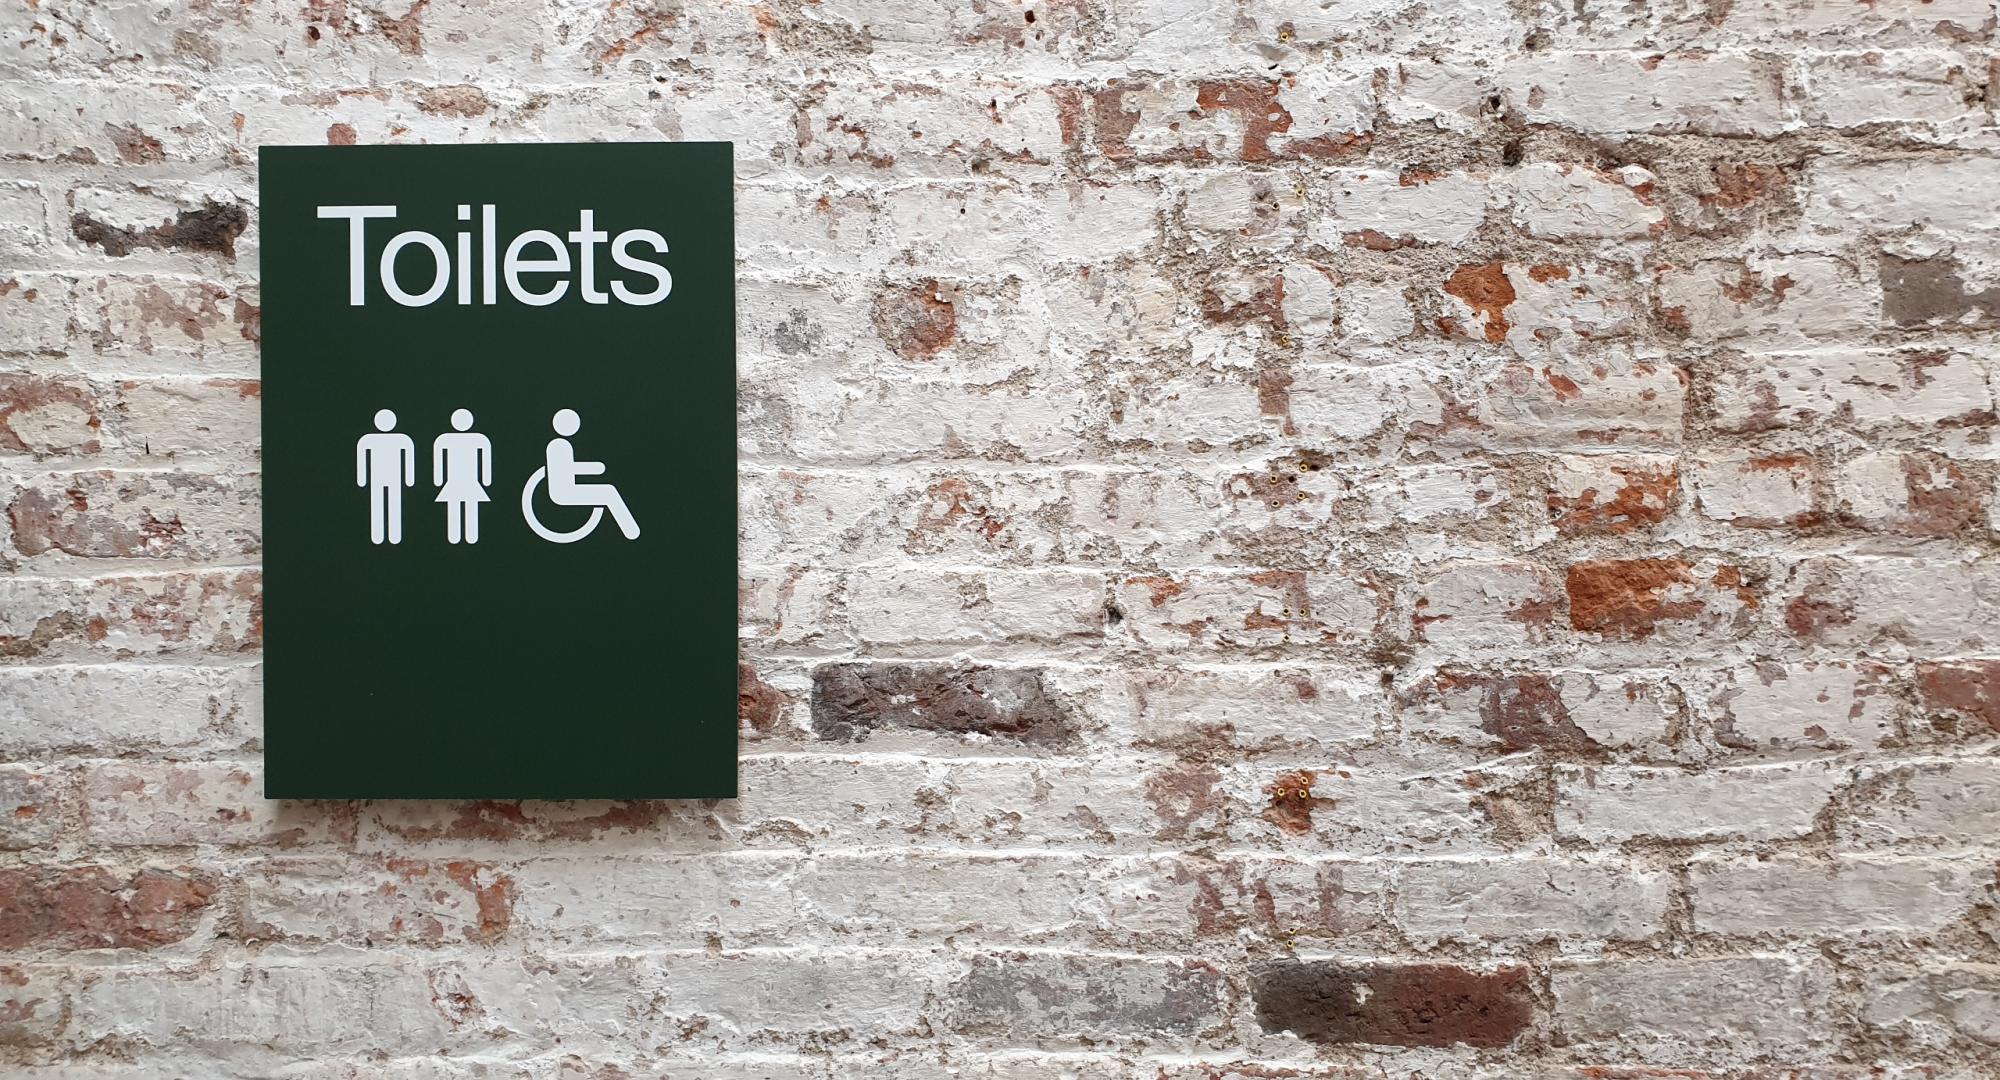 Toilets sign